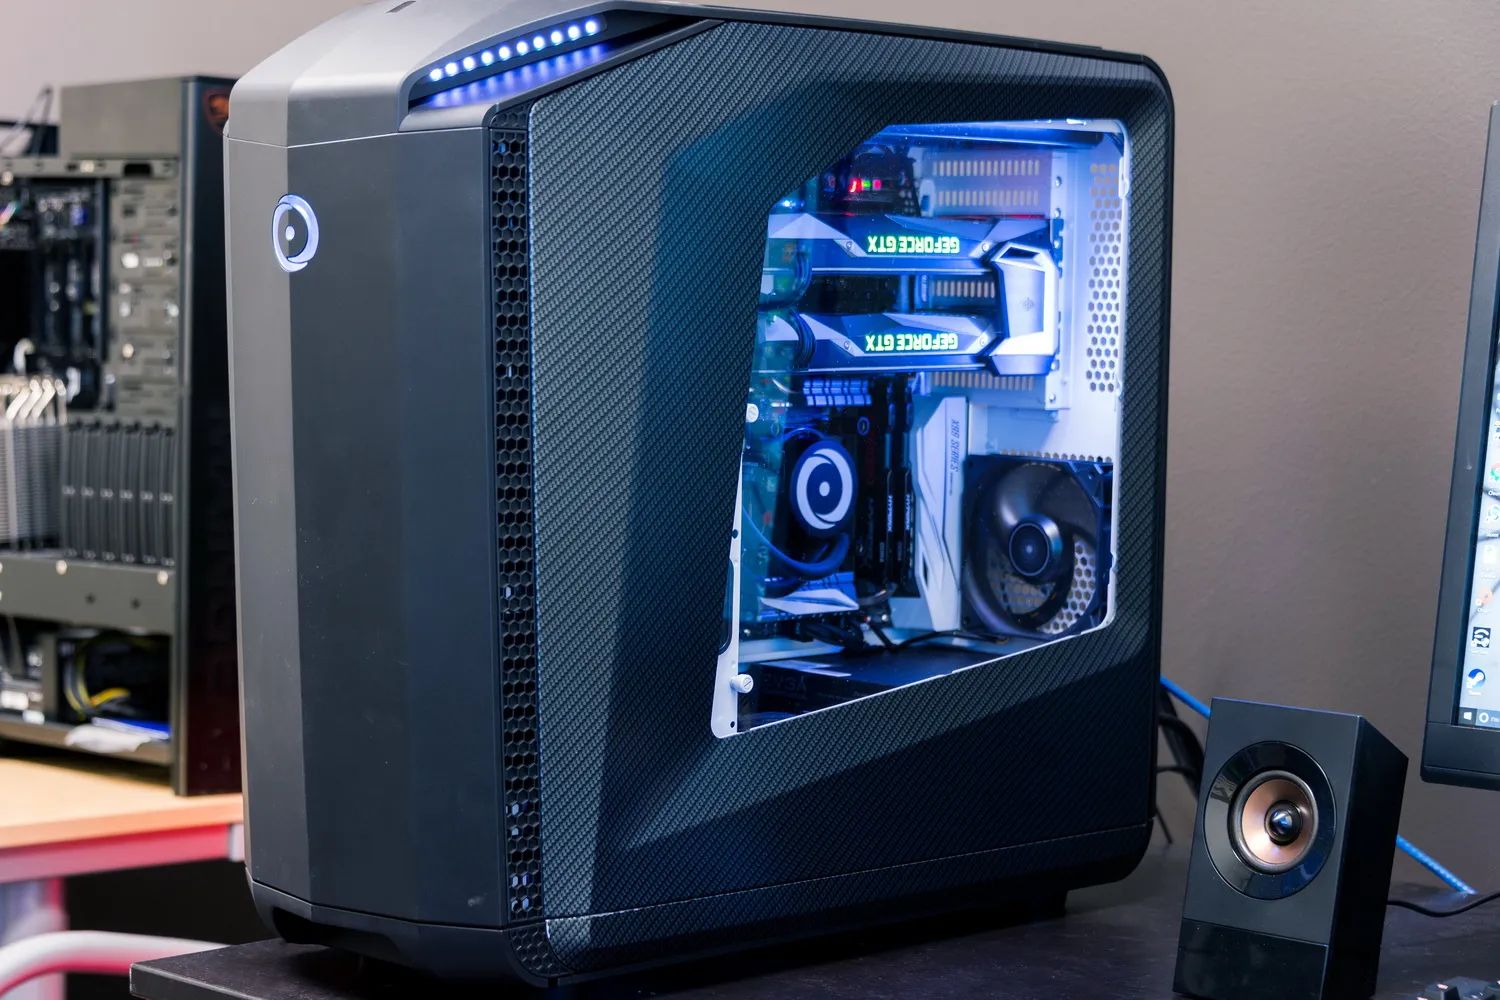 What Is The Best Full Tower PC Case In 2016